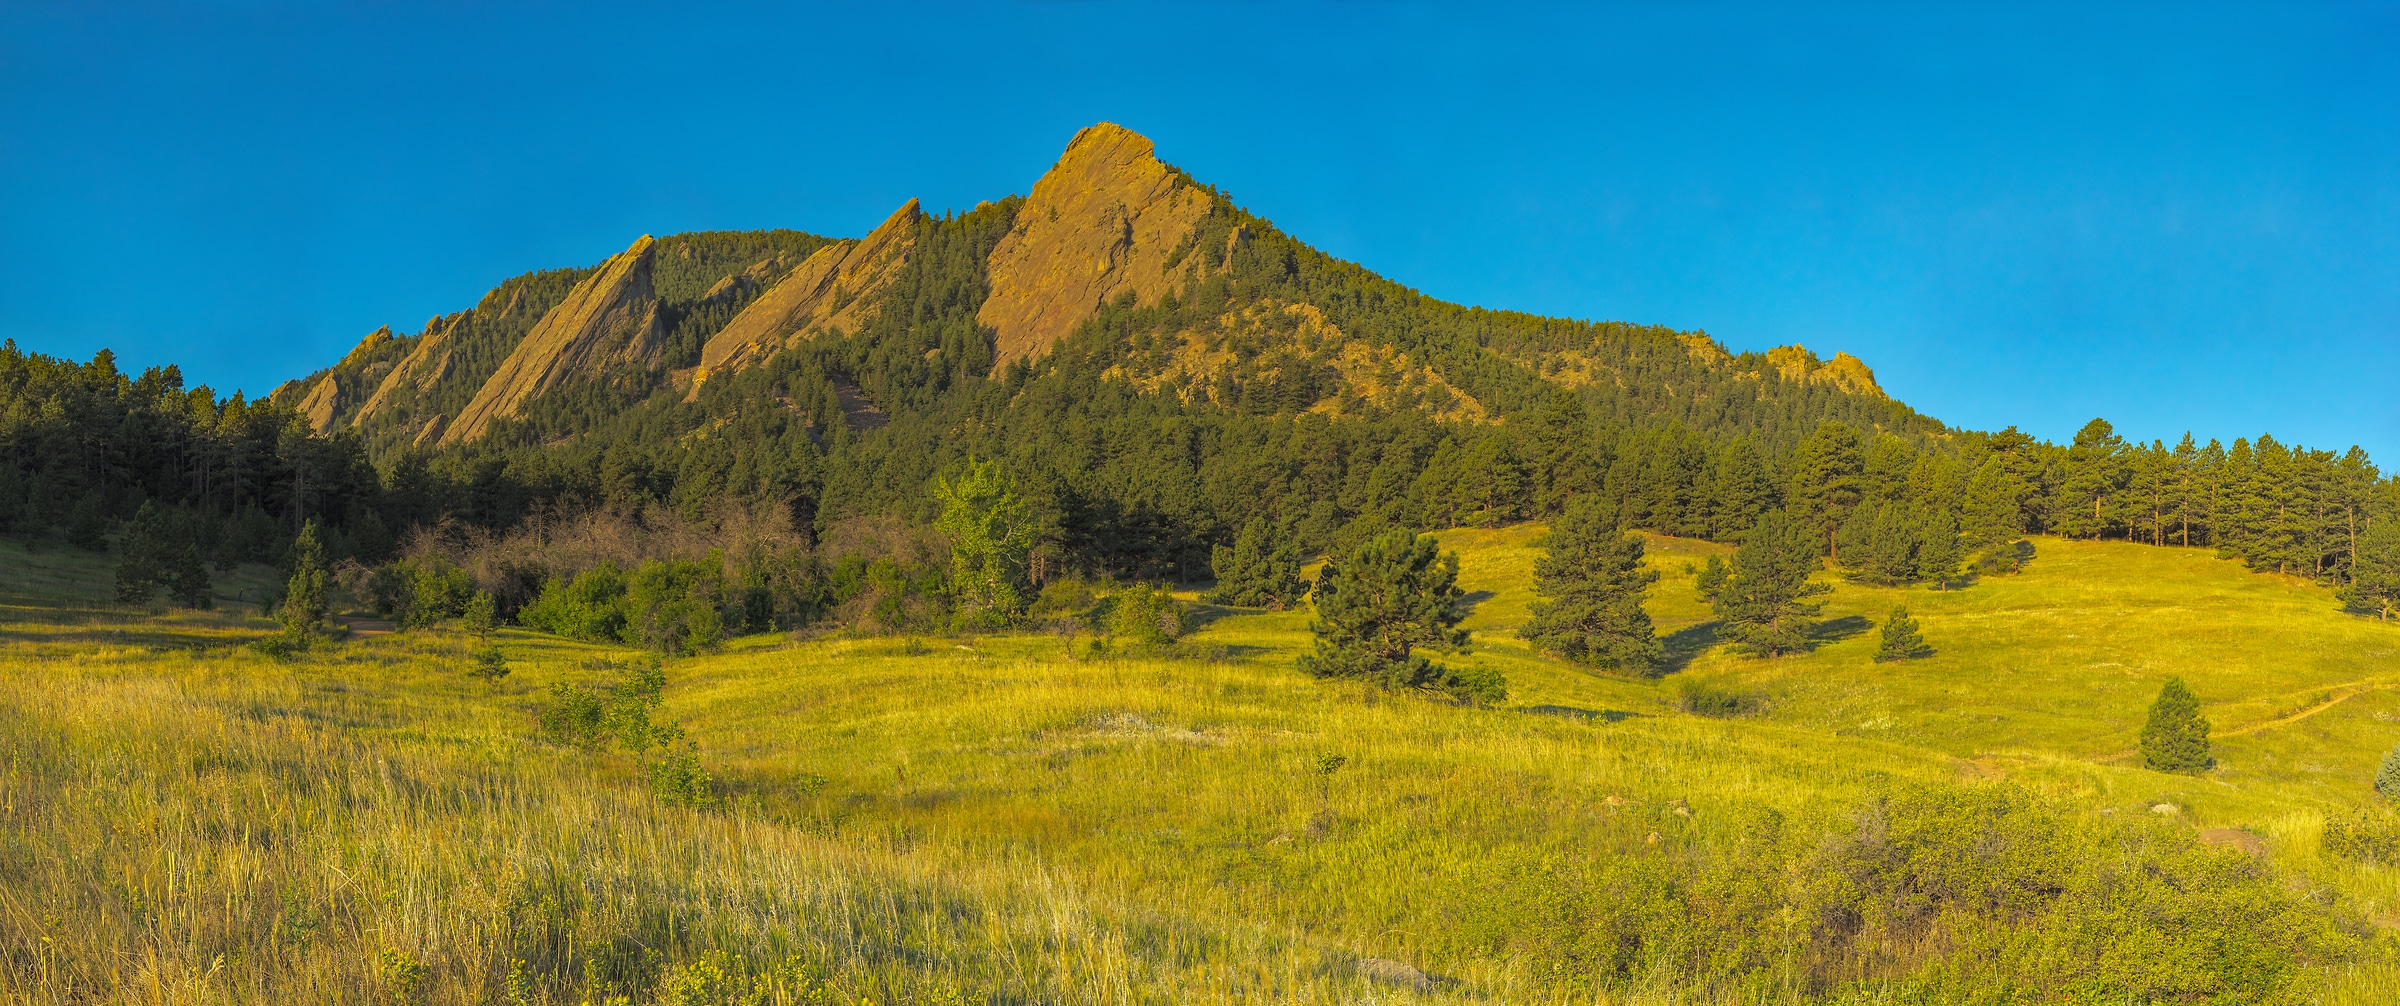 3,454 megapixels! A very high resolution, large-format VAST photo print of mountains and rock formations behind a field; landscape photograph created by John Freeman in Chautauqua Park, Boulder, Colorado